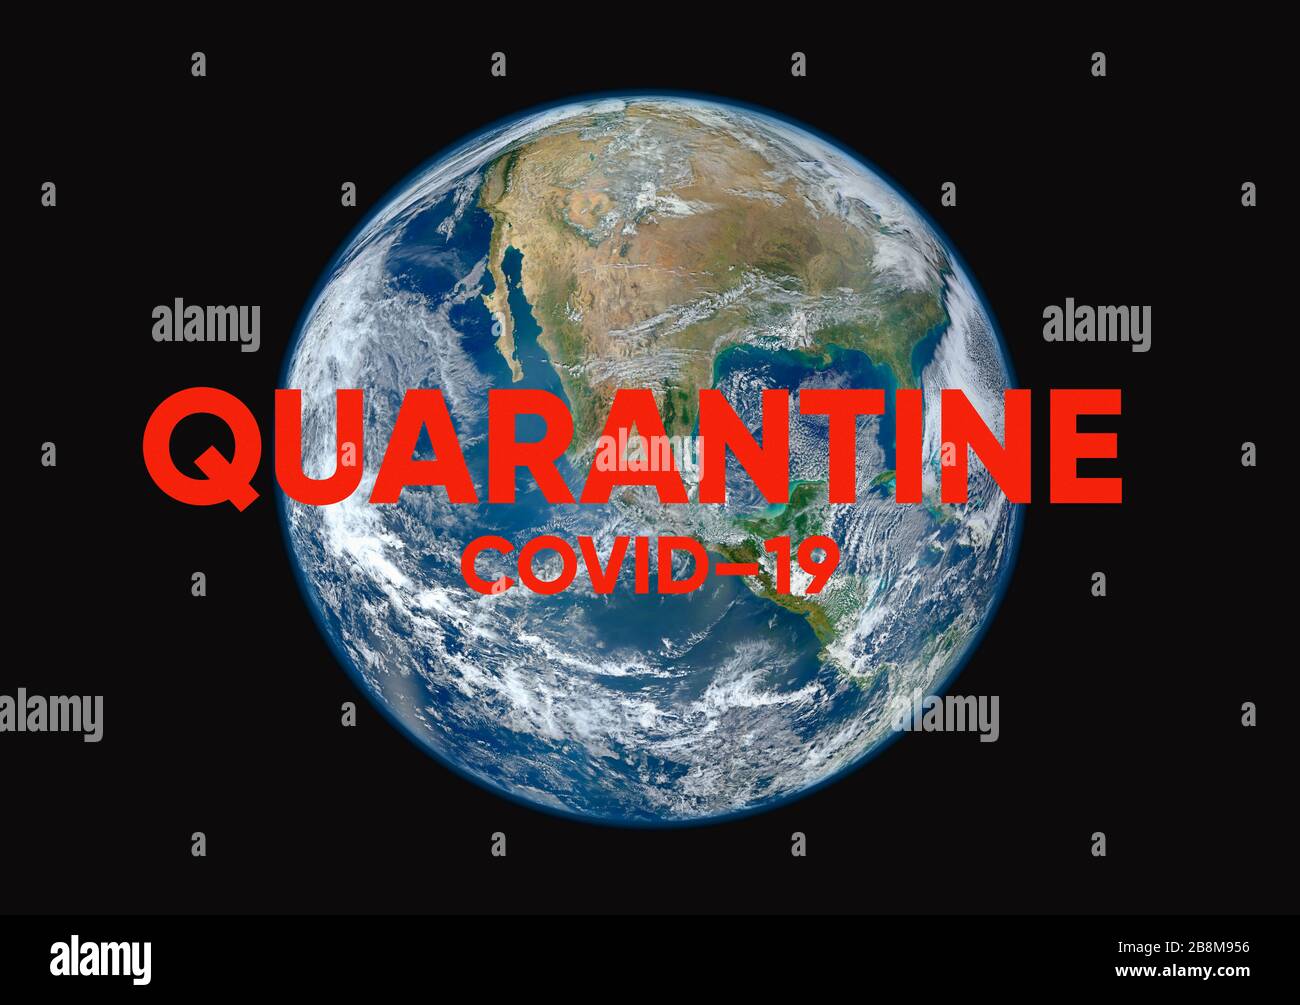 Coronavirus global outbreak and pandemic, COVID 19 quarantine illustration with planet Earth as seen from cosmos and red text Stock Photo